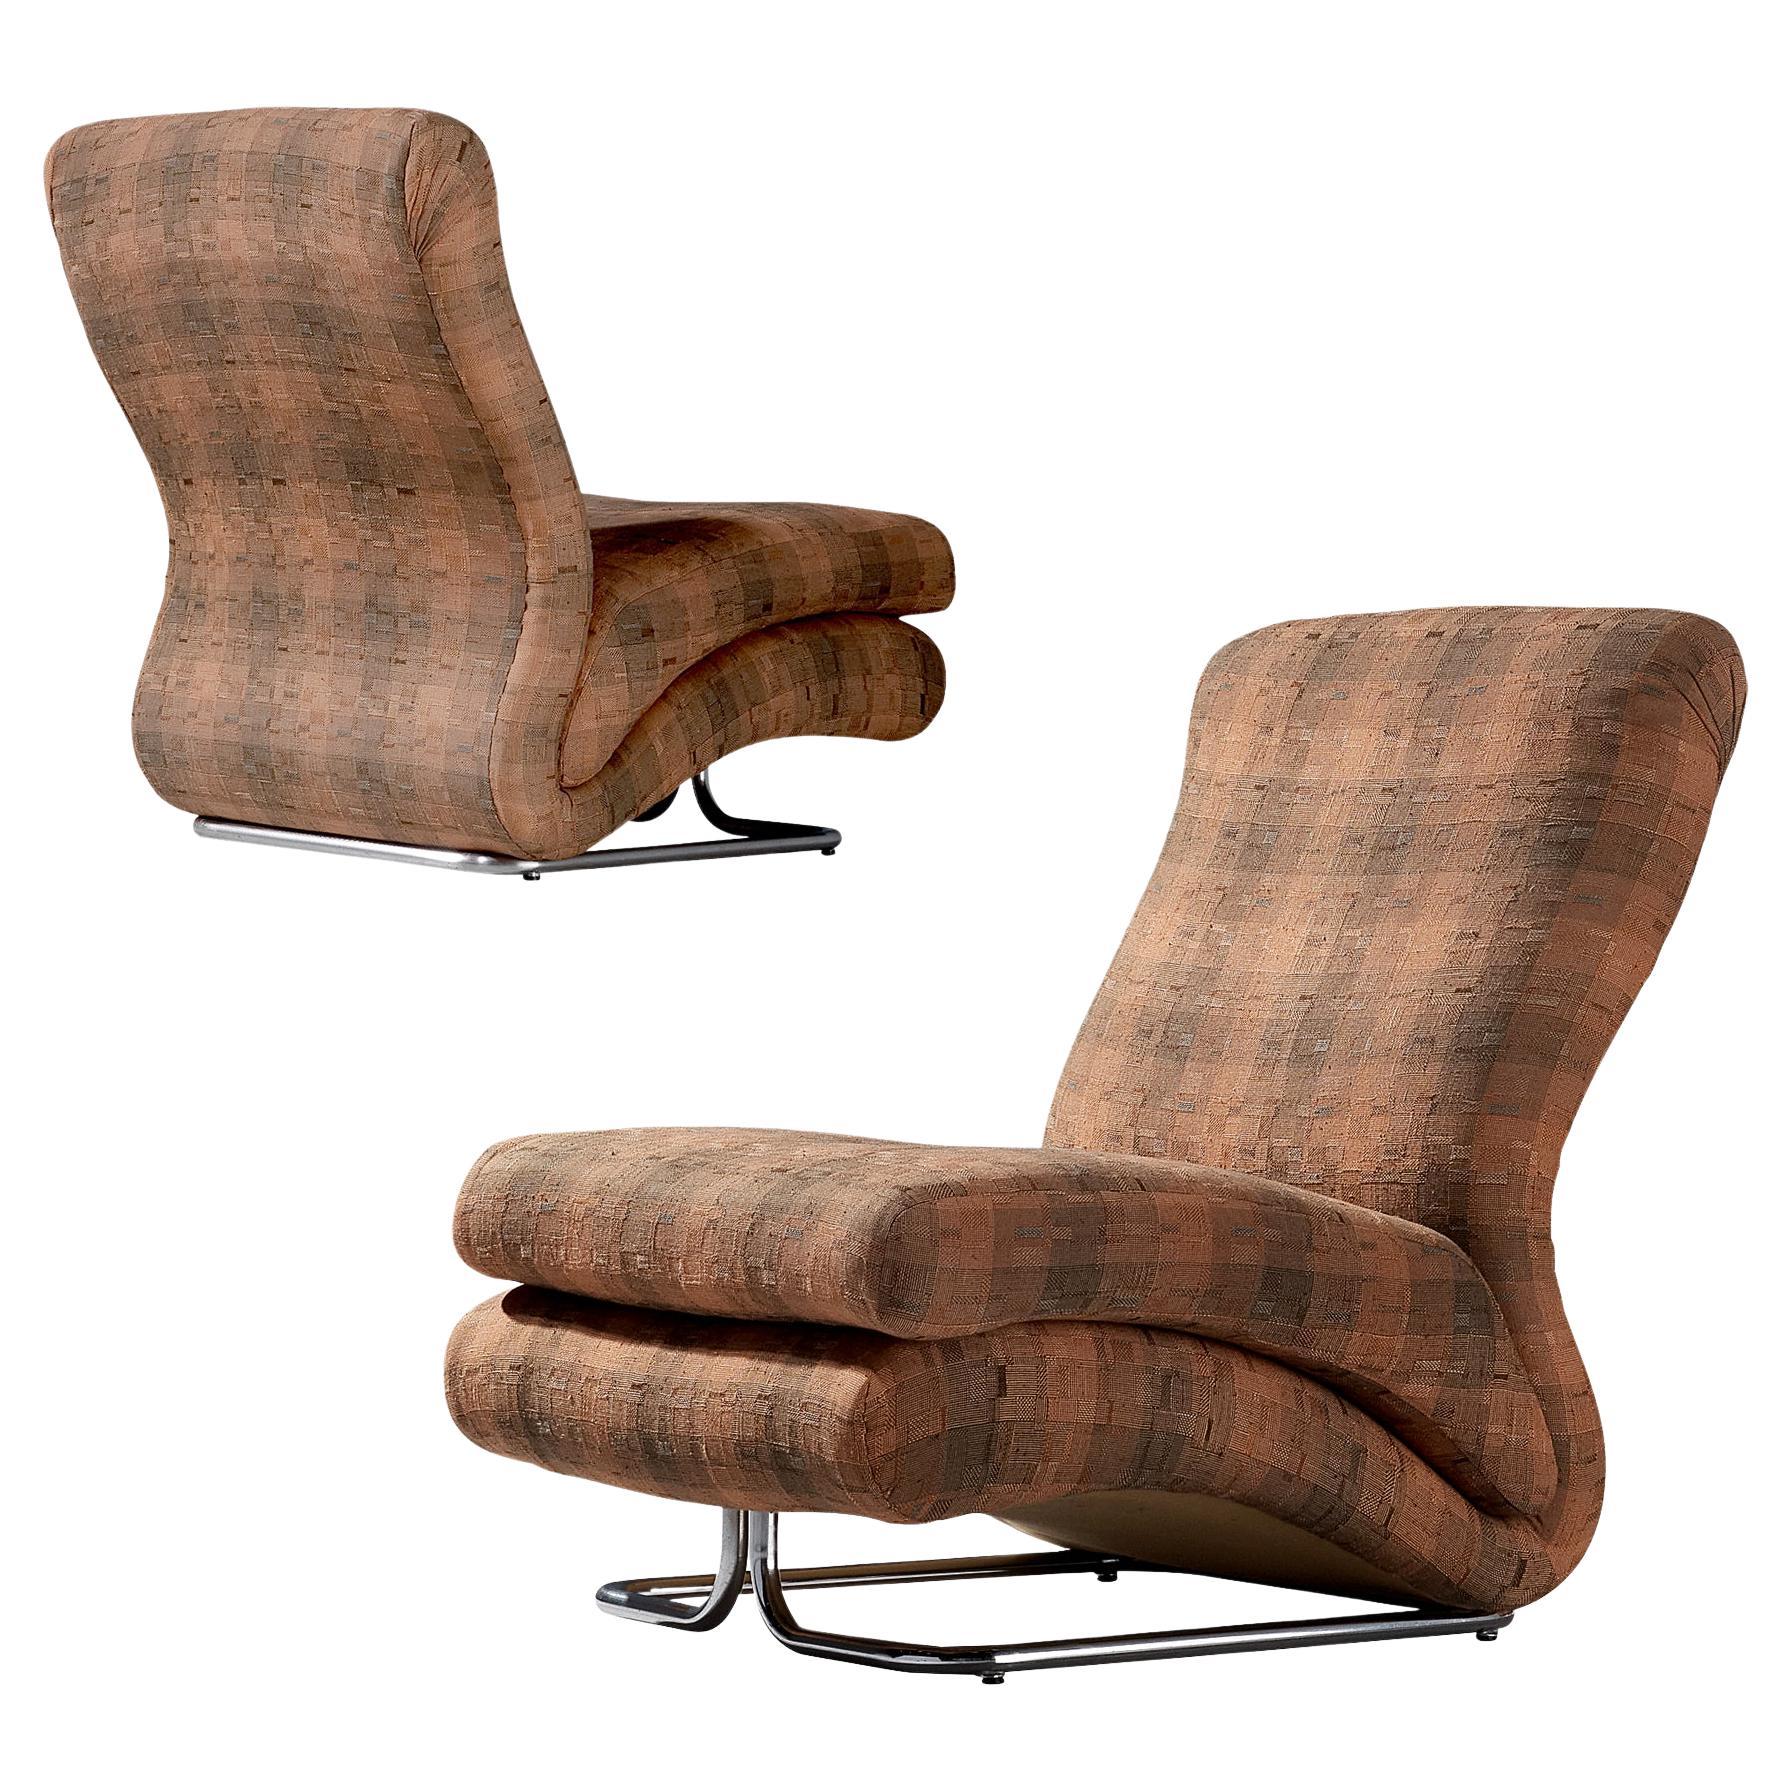 Vittorio Varo for I.P.E. Pair of 'Cigno' Lounge Chairs in Checkered Upholstery